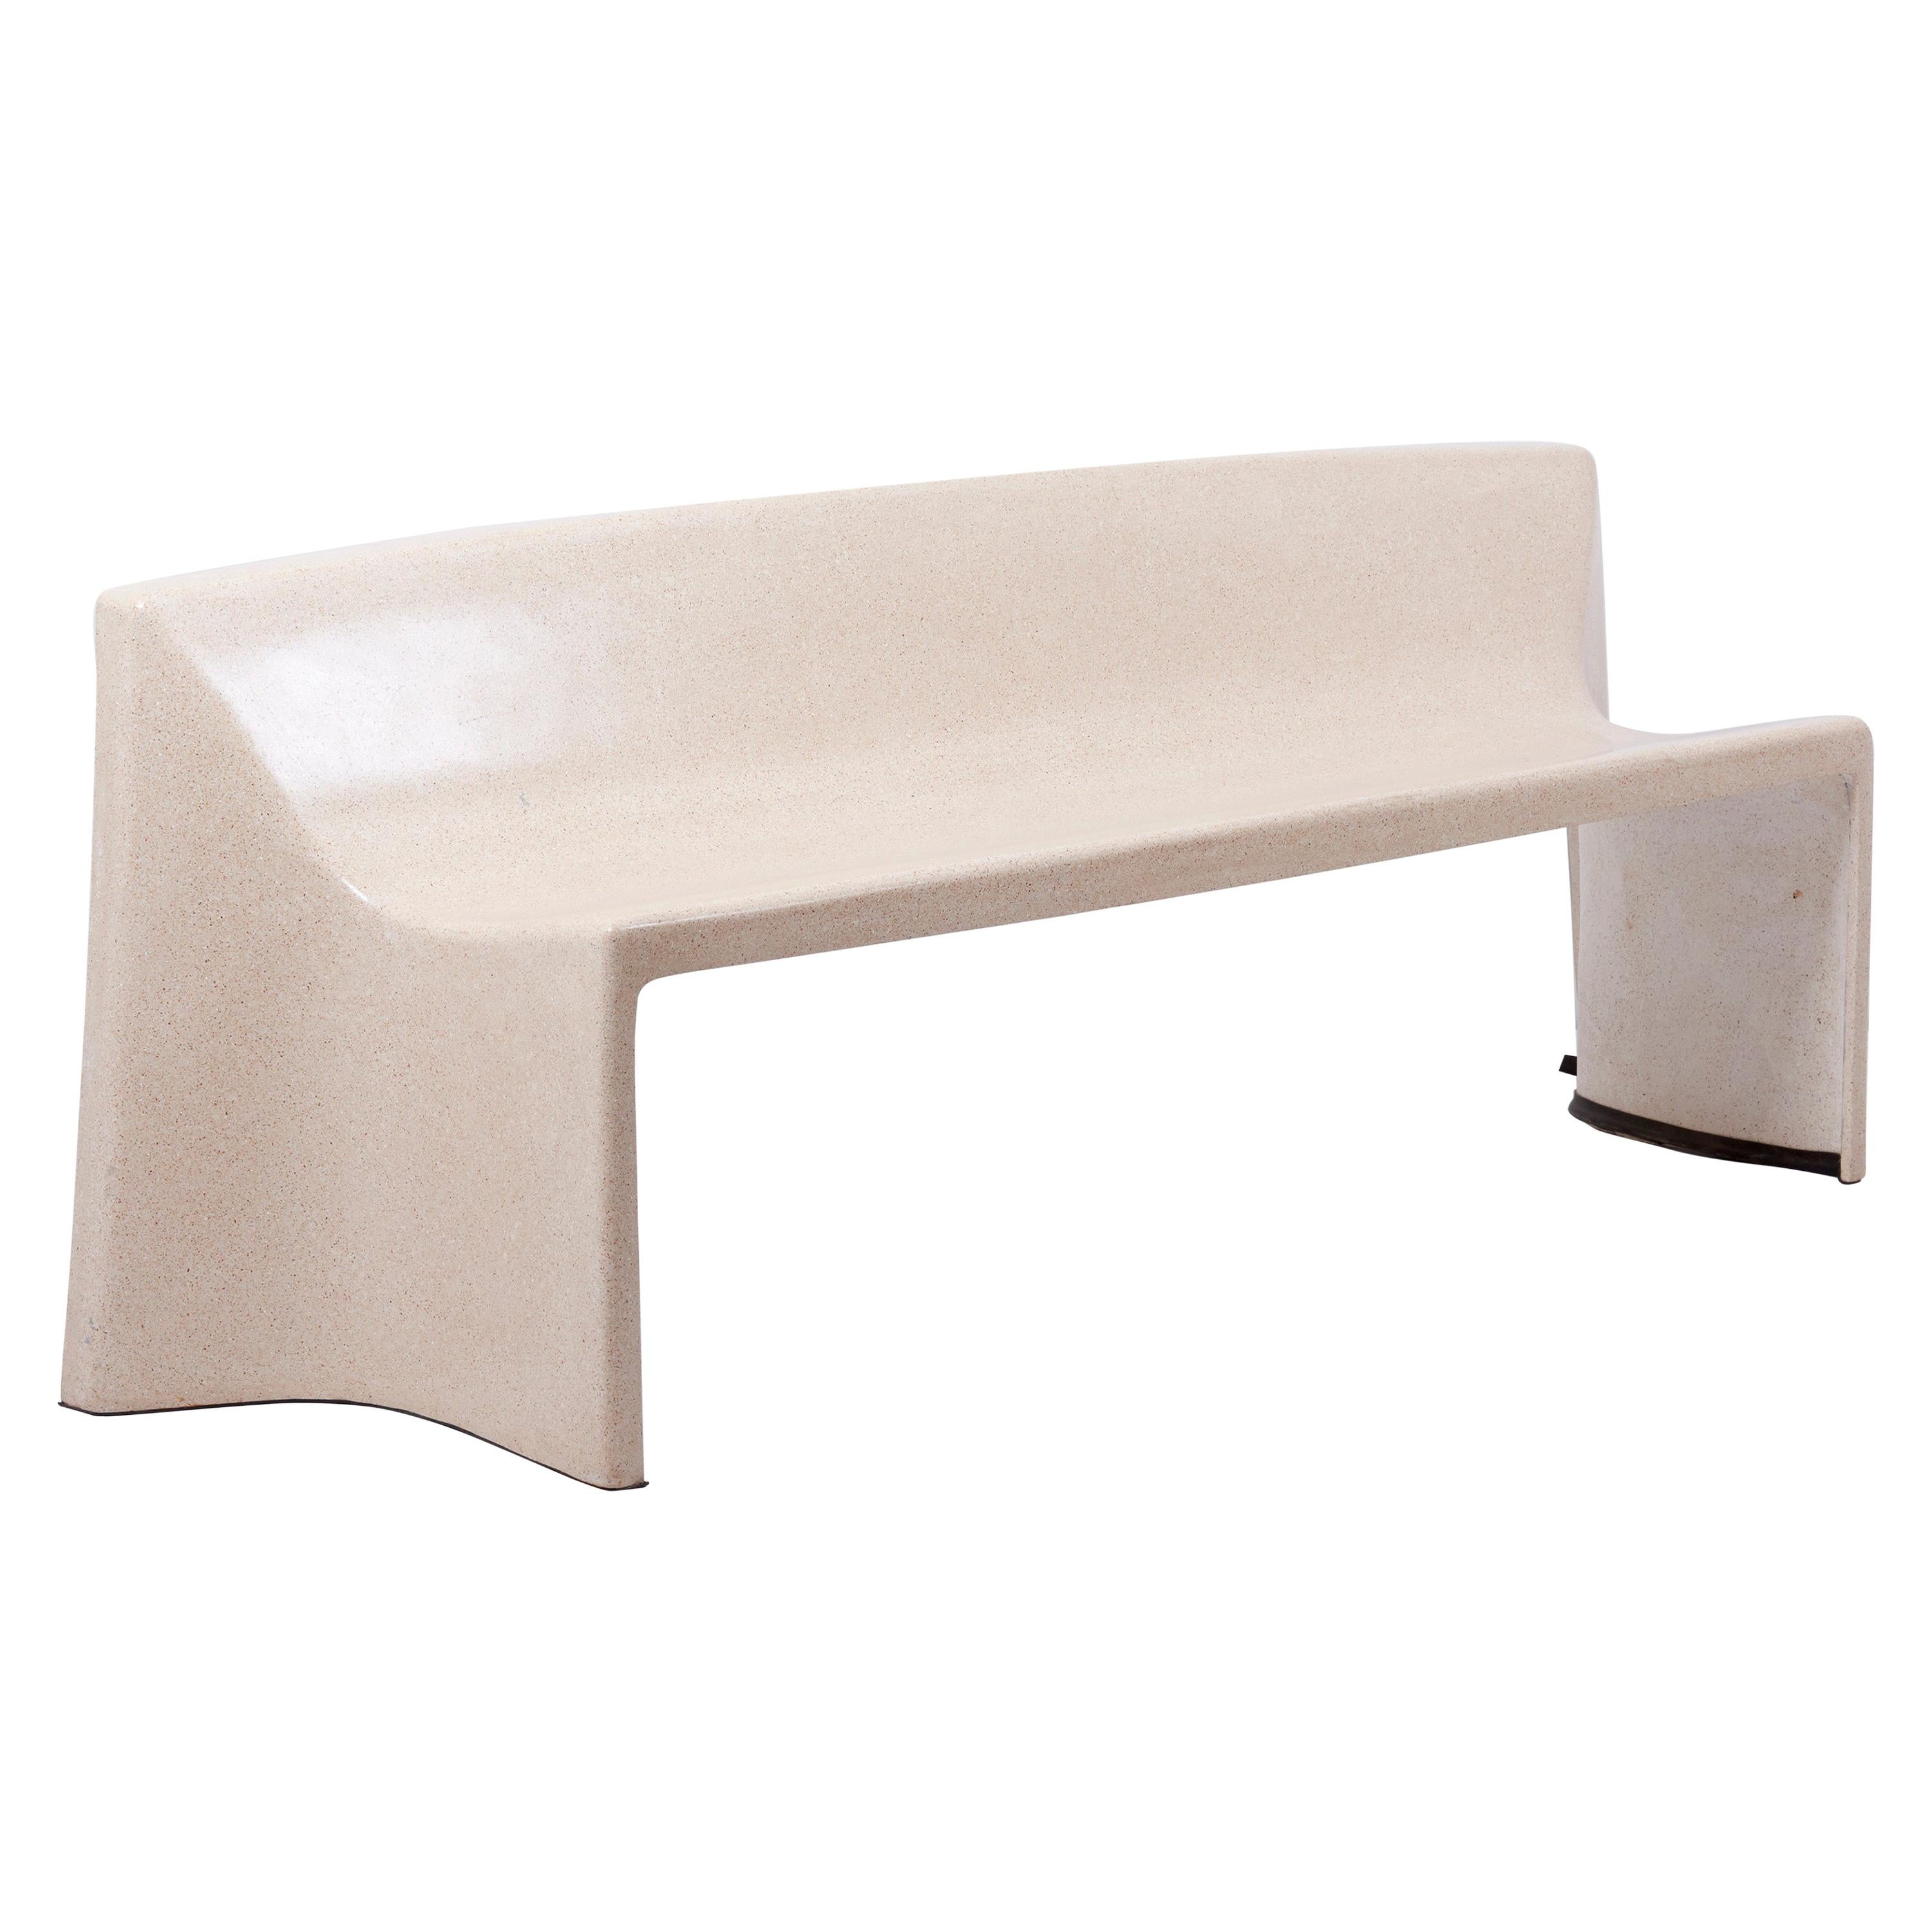 Architectural Concrete Bench by Martin Kleppe, Germany, circa 2011 For Sale